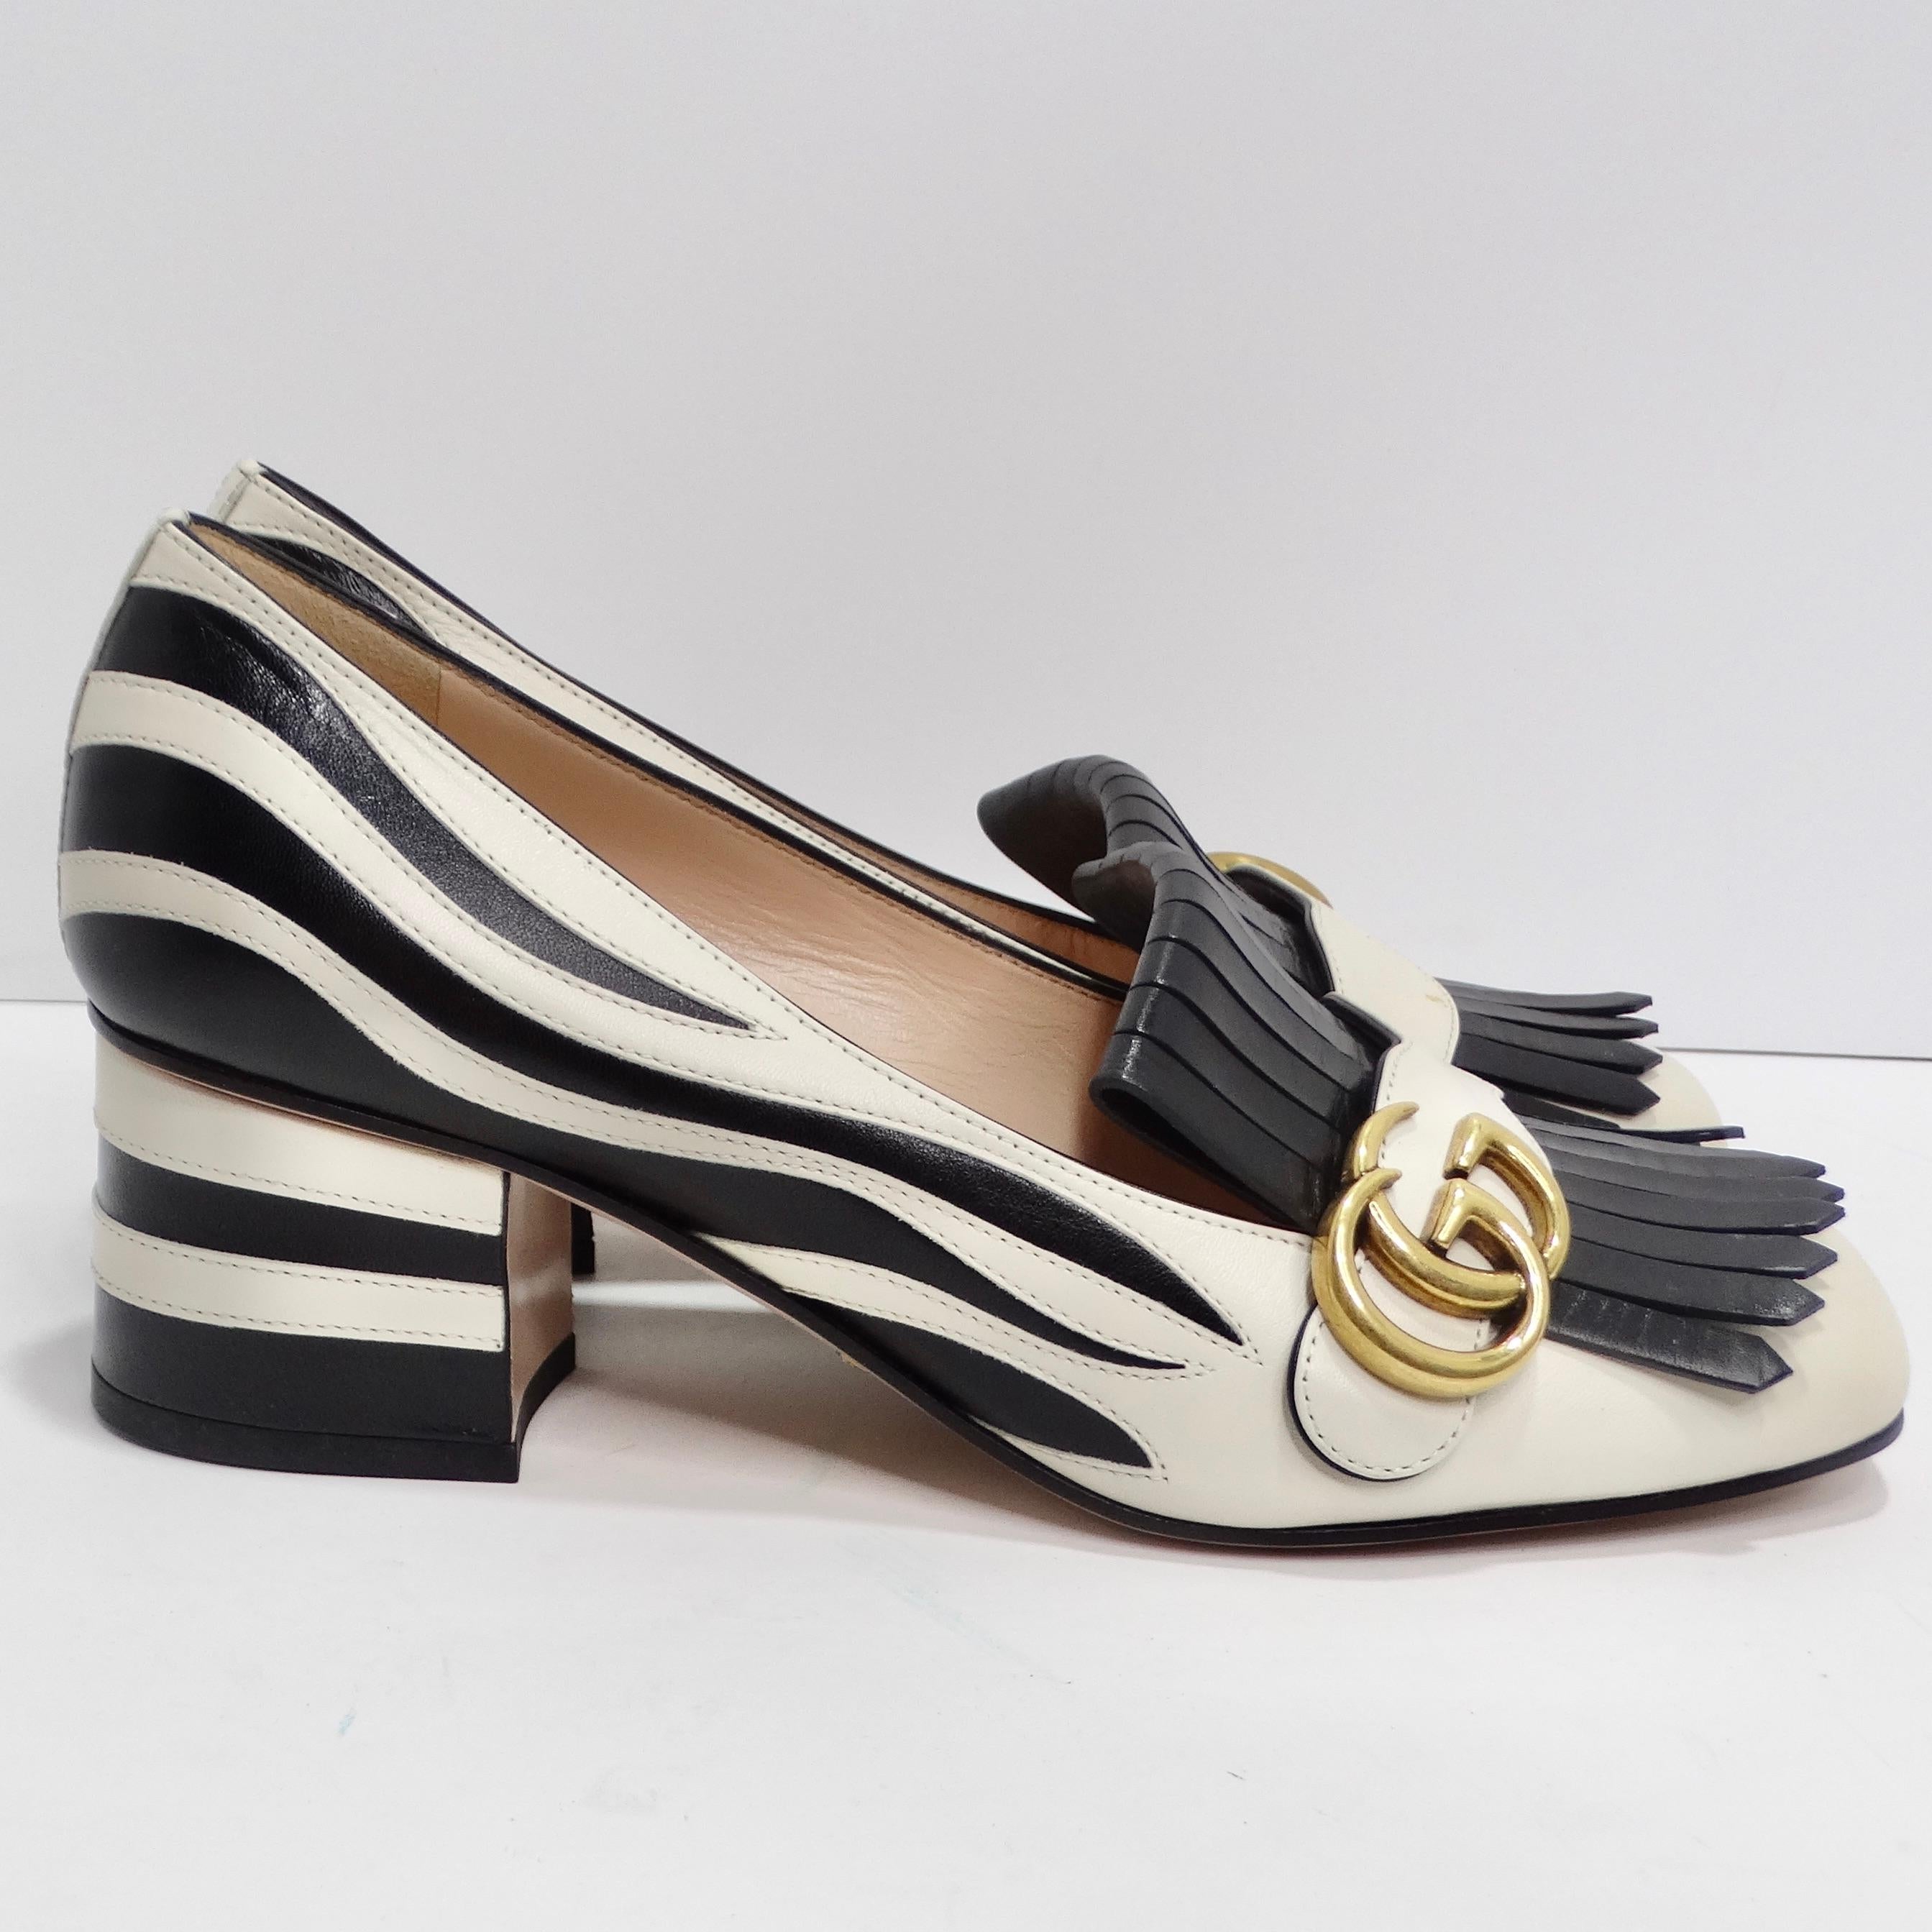 Gucci Marmont Fringe Leather 55mm Loafer For Sale 2